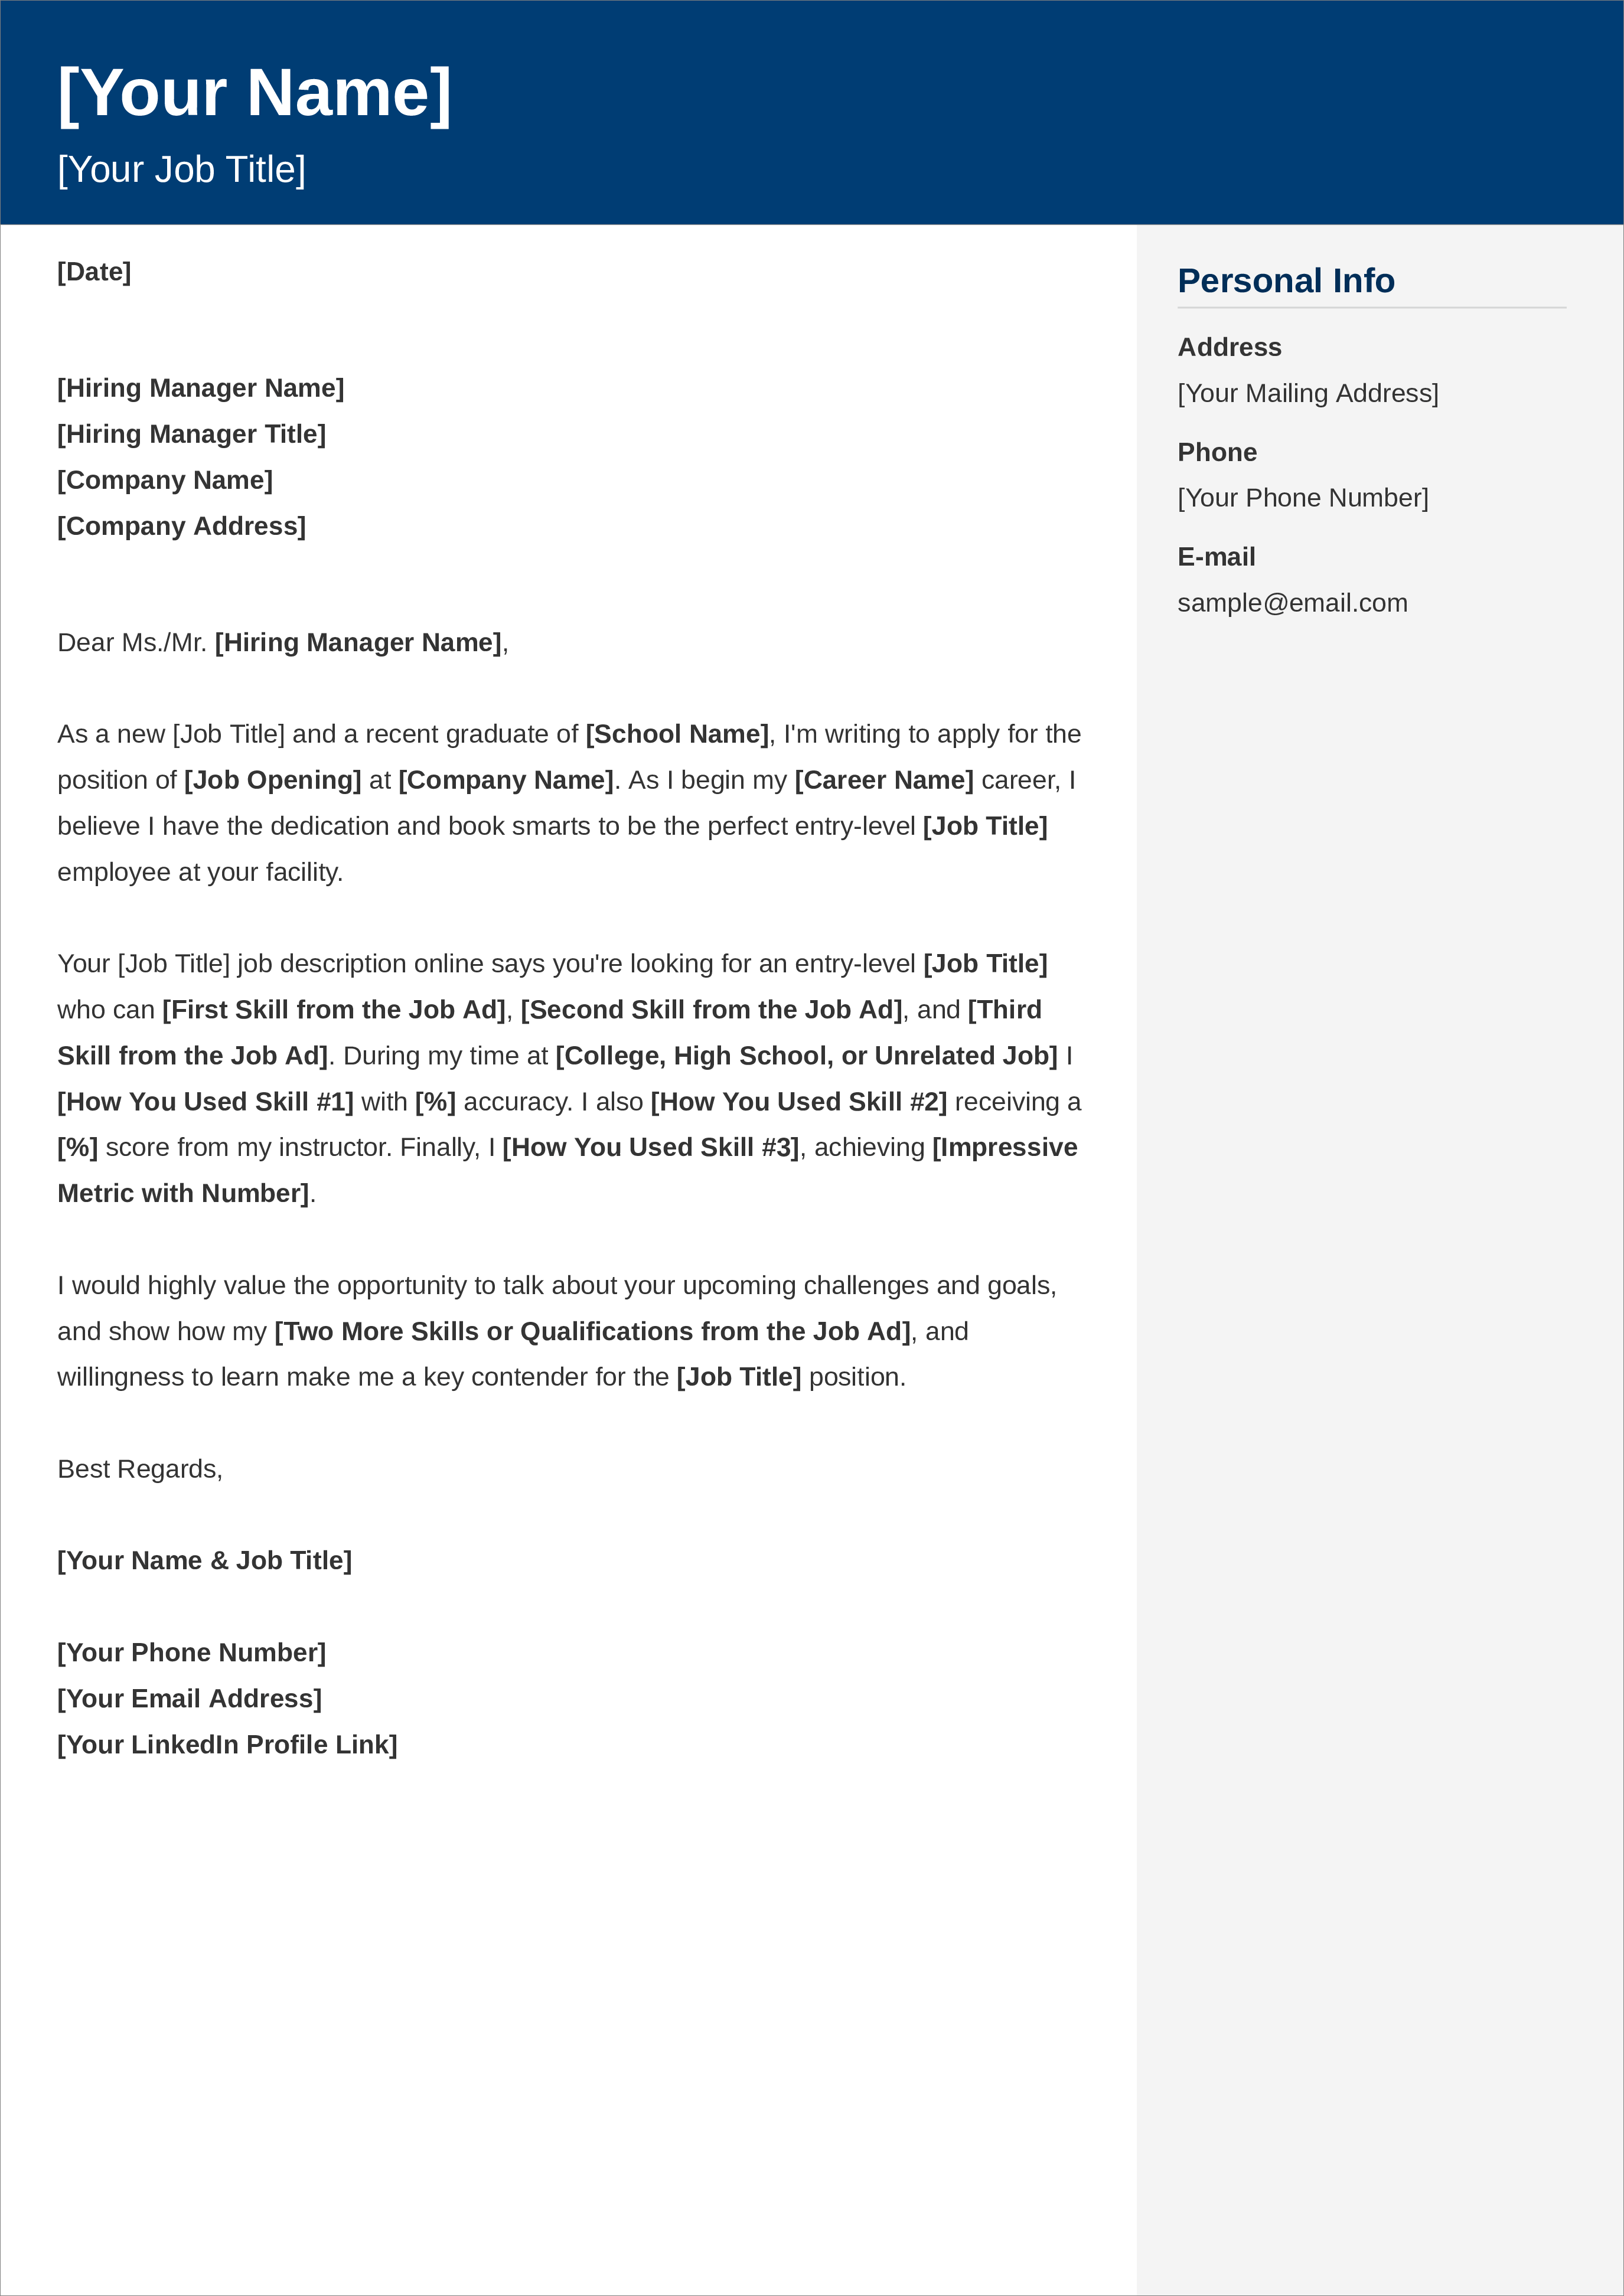 Generic Cover Letter Greeting from cdn-images.resumelab.com